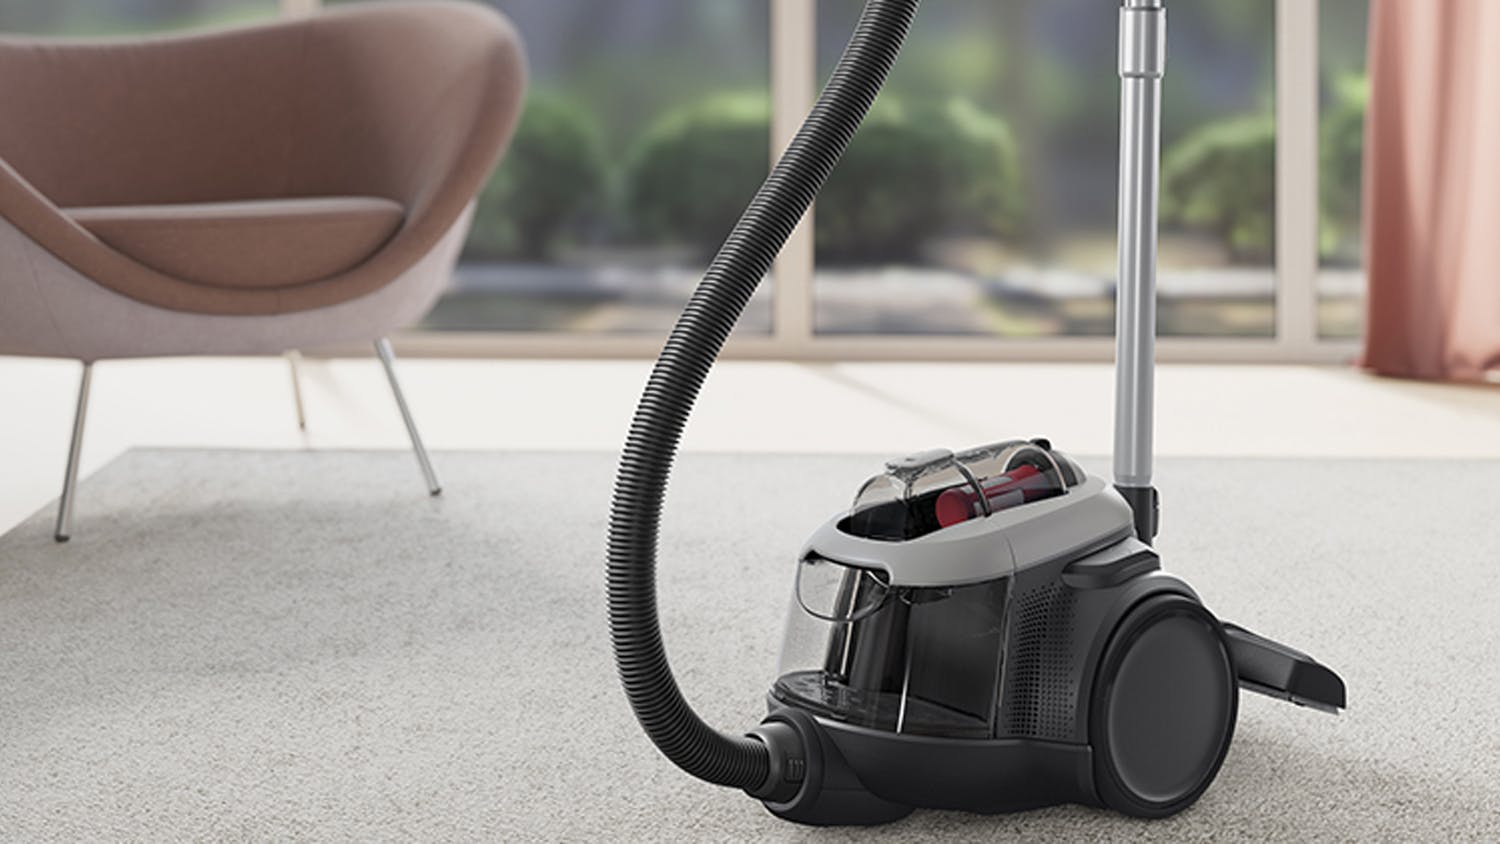 Electrolux UltimateHome 700 Vacuum Cleaner